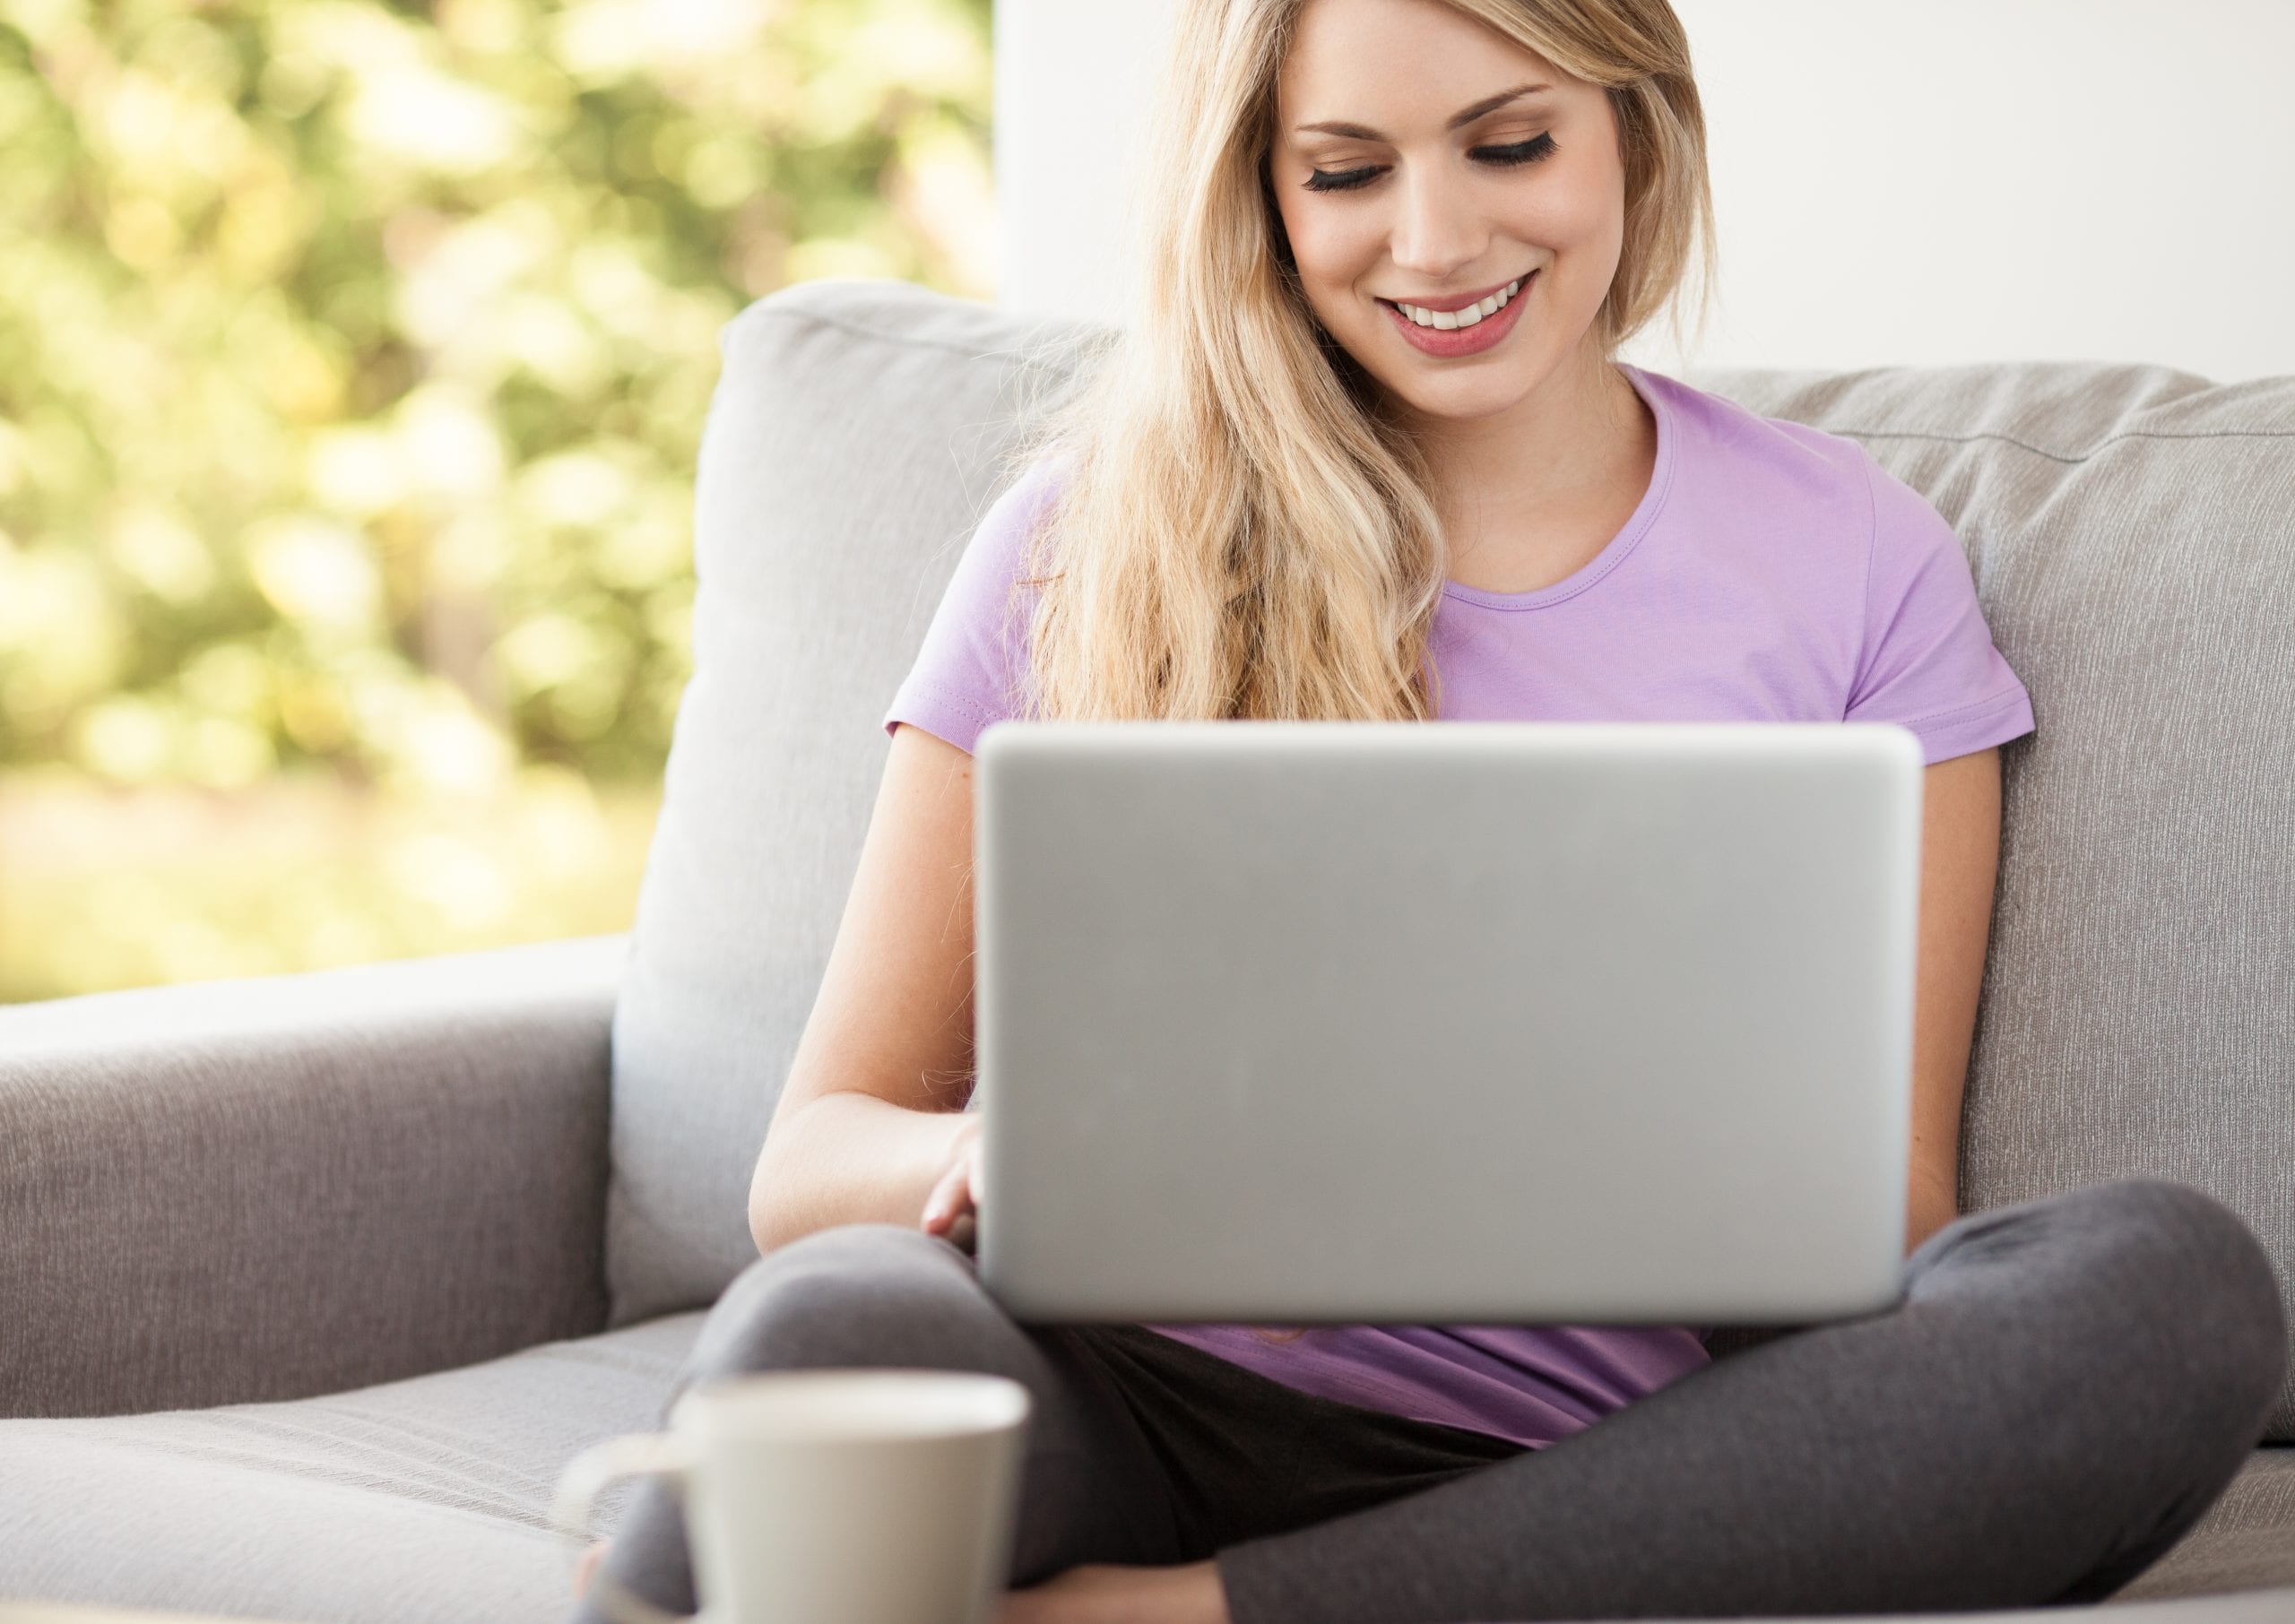 Woman using a laptop computer at home representing display advertising and remarketing